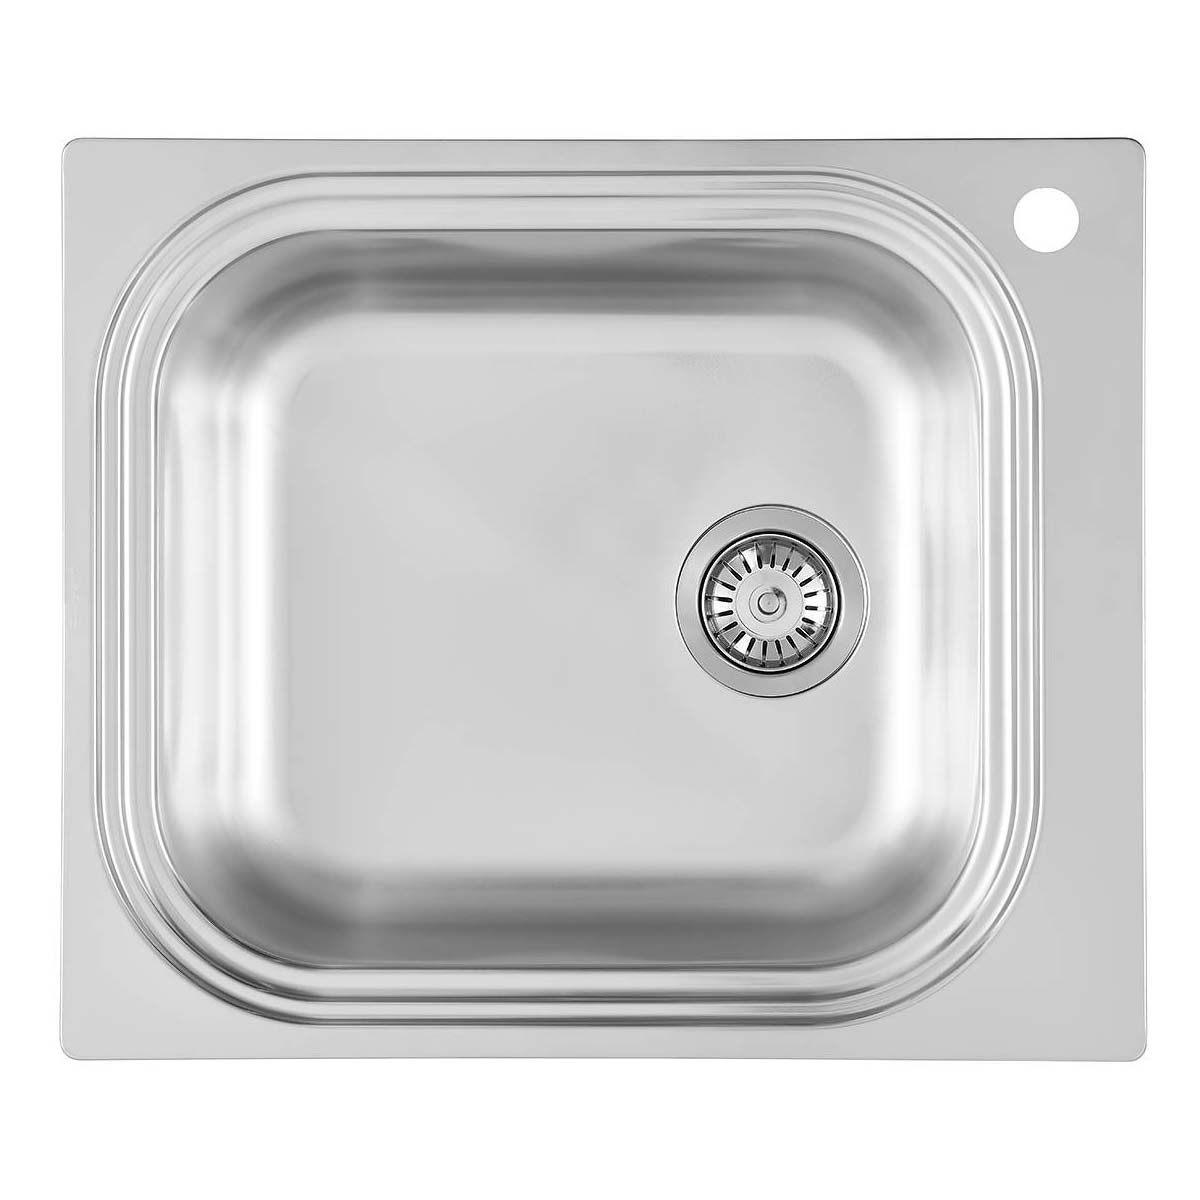 Foster Big Bowl Kitchen Sink 590x500mm Right Side Waste Brushed Stainless Steel